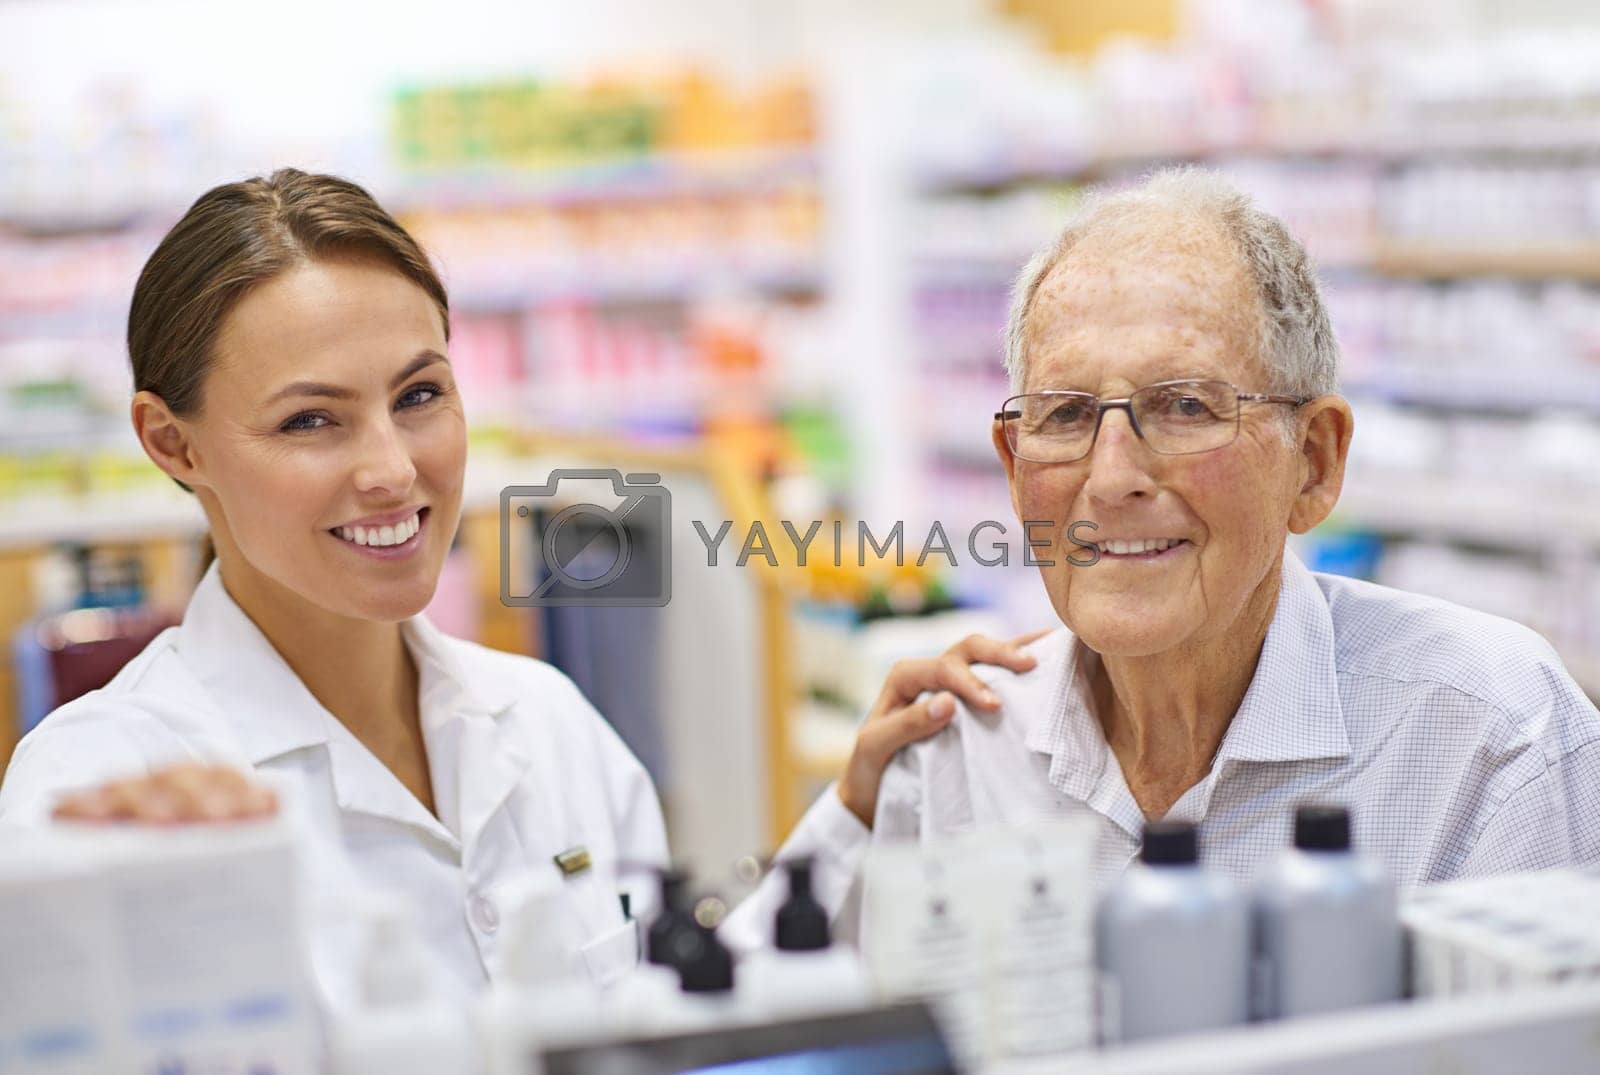 Royalty free image of Clients health is her foremost concern. Portrait of a young pharmacist helping an elderly customer. by YuriArcurs